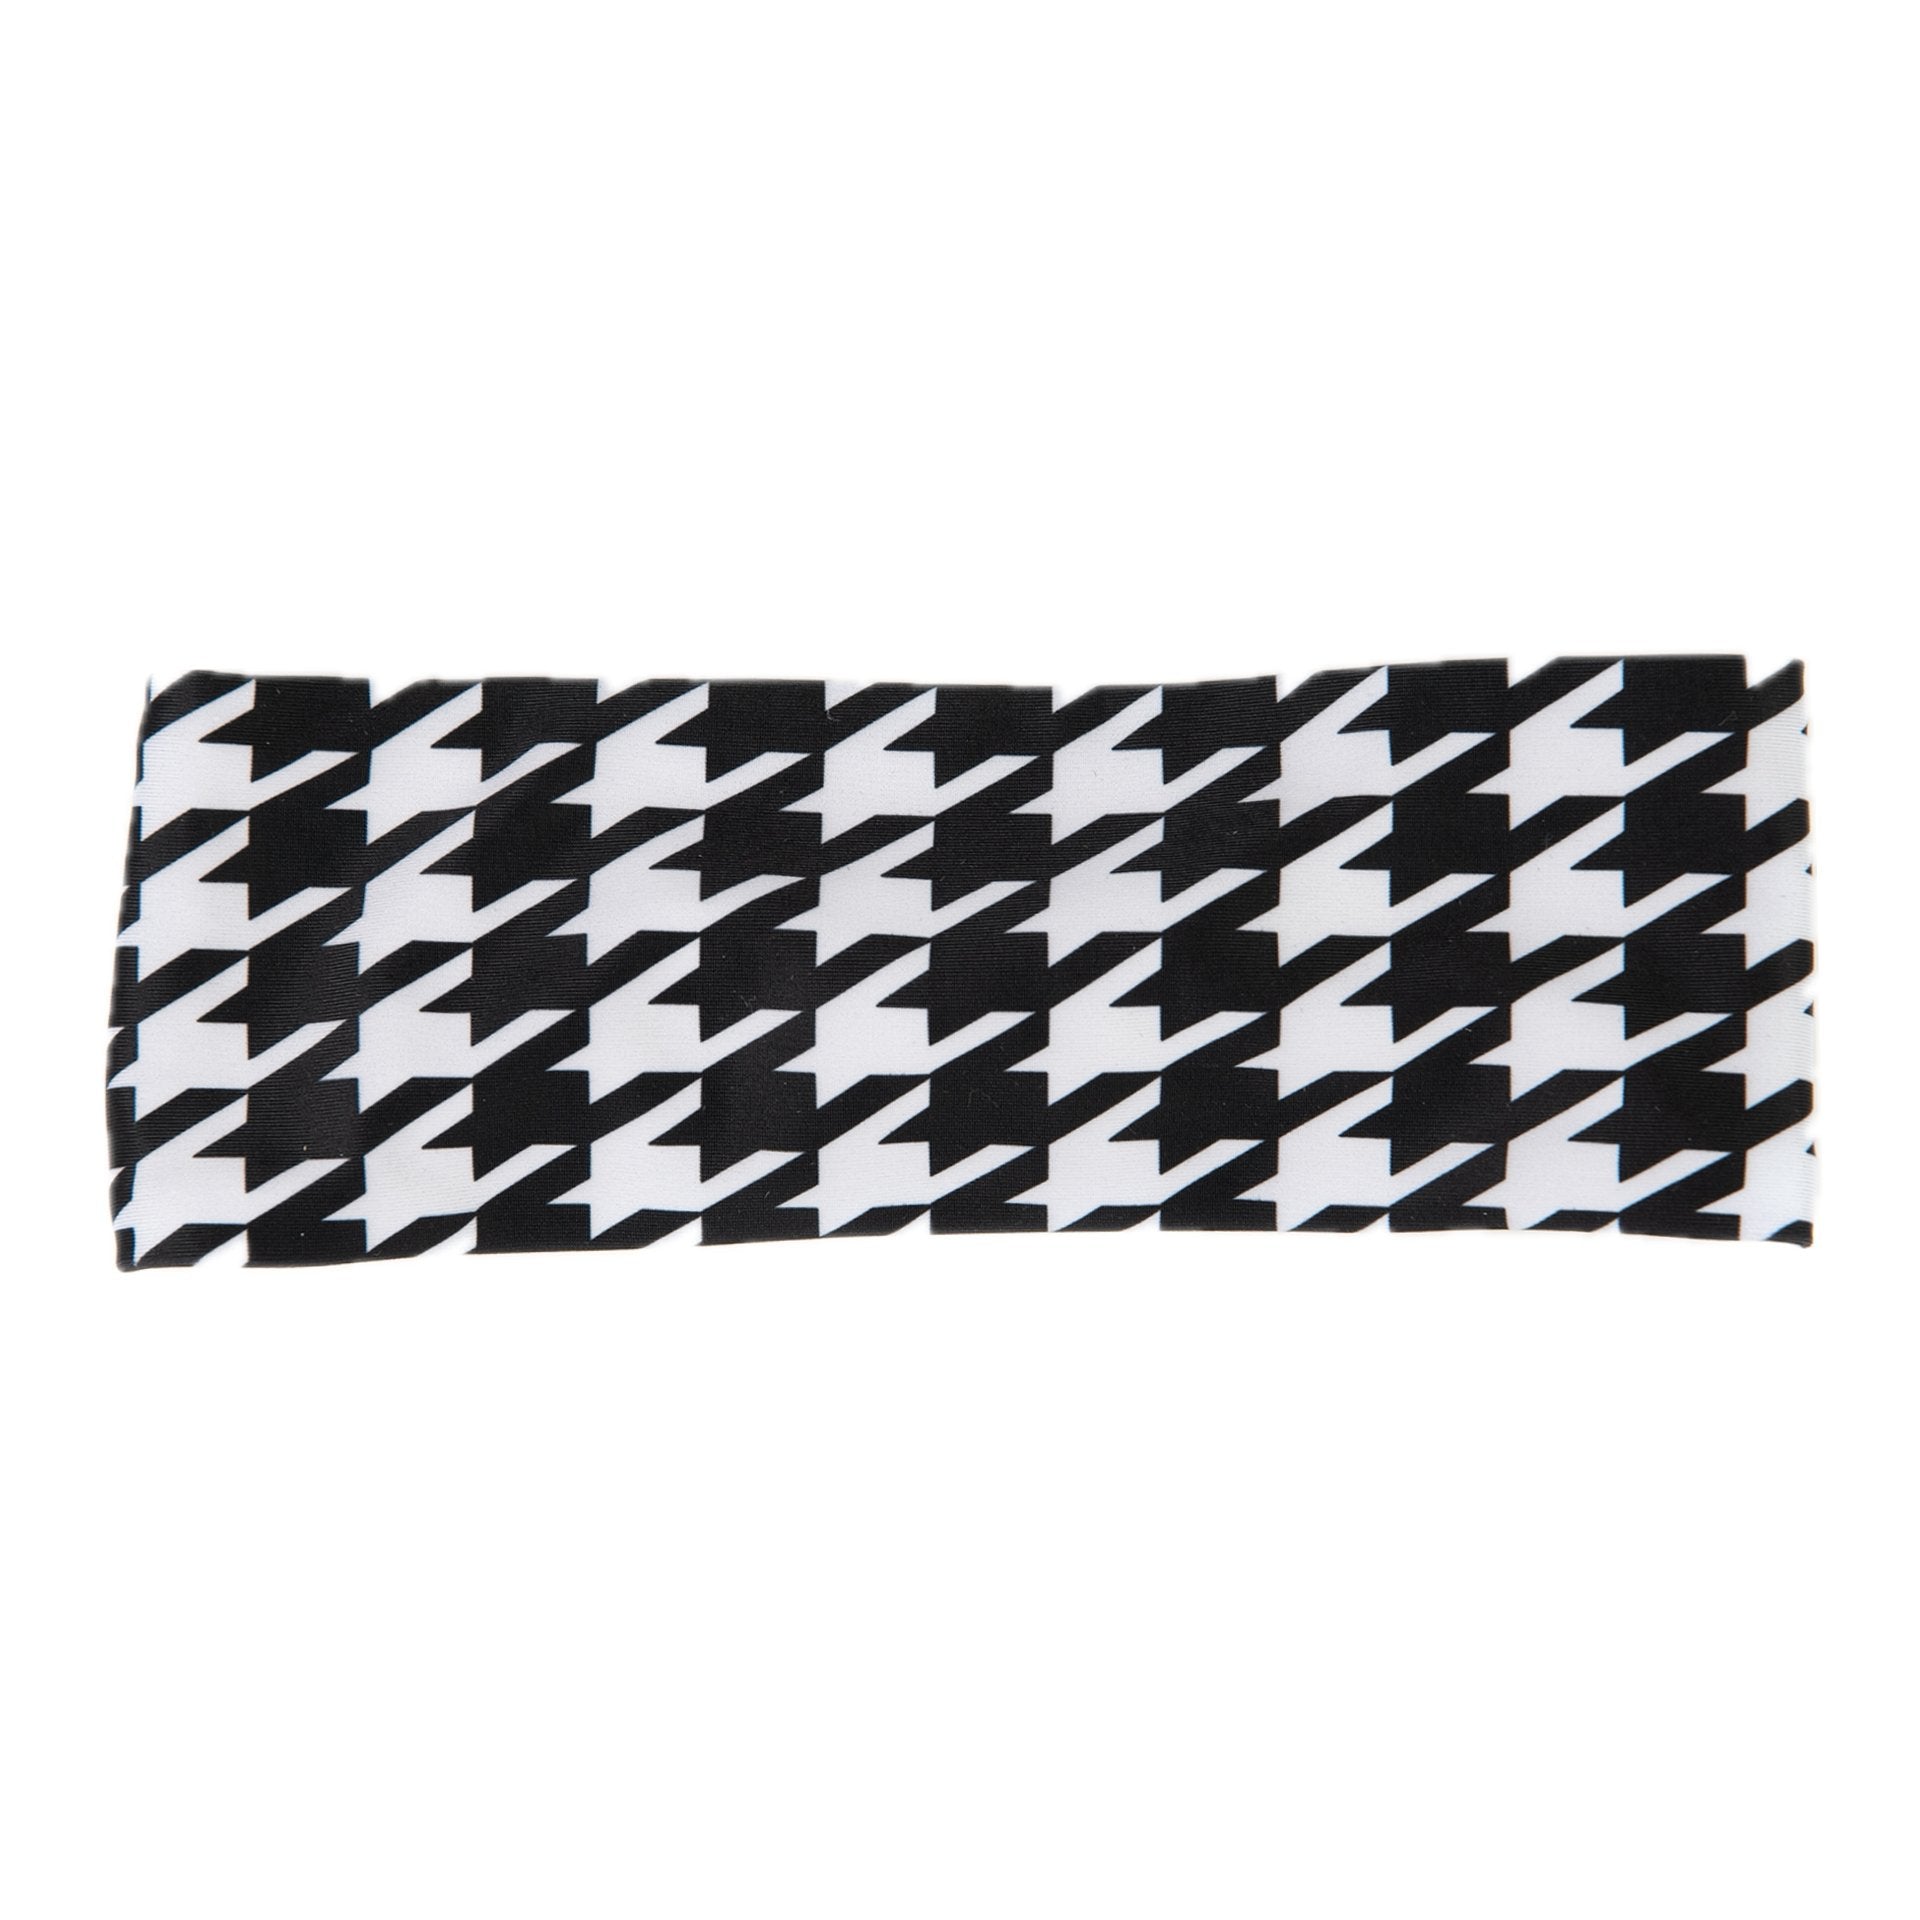 Houndstooth Bamboo Jersey Lined Sweatband - Ponya Bands